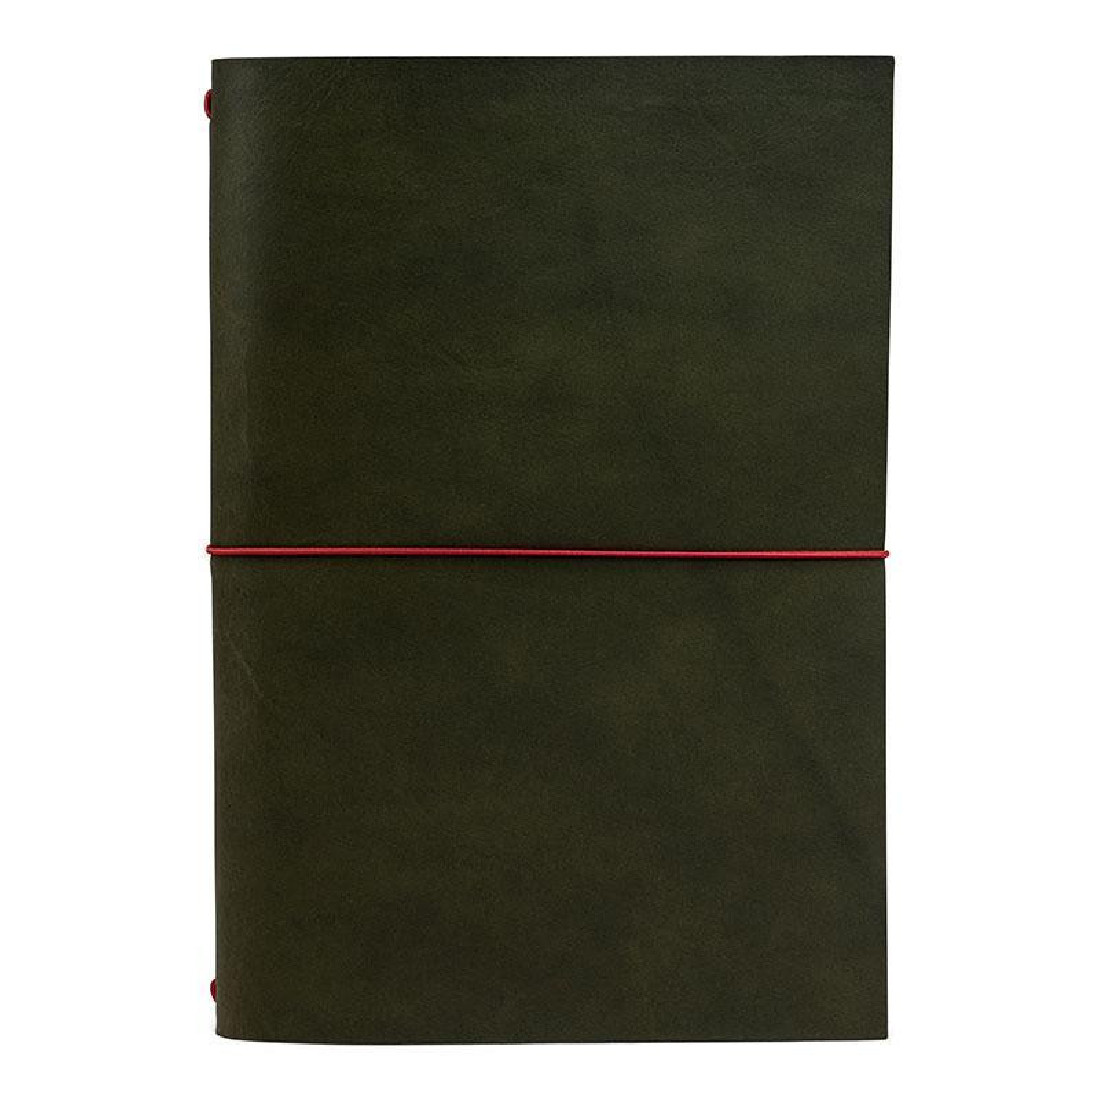 Paper Republic grand voyageur [xl] olive green leather journal